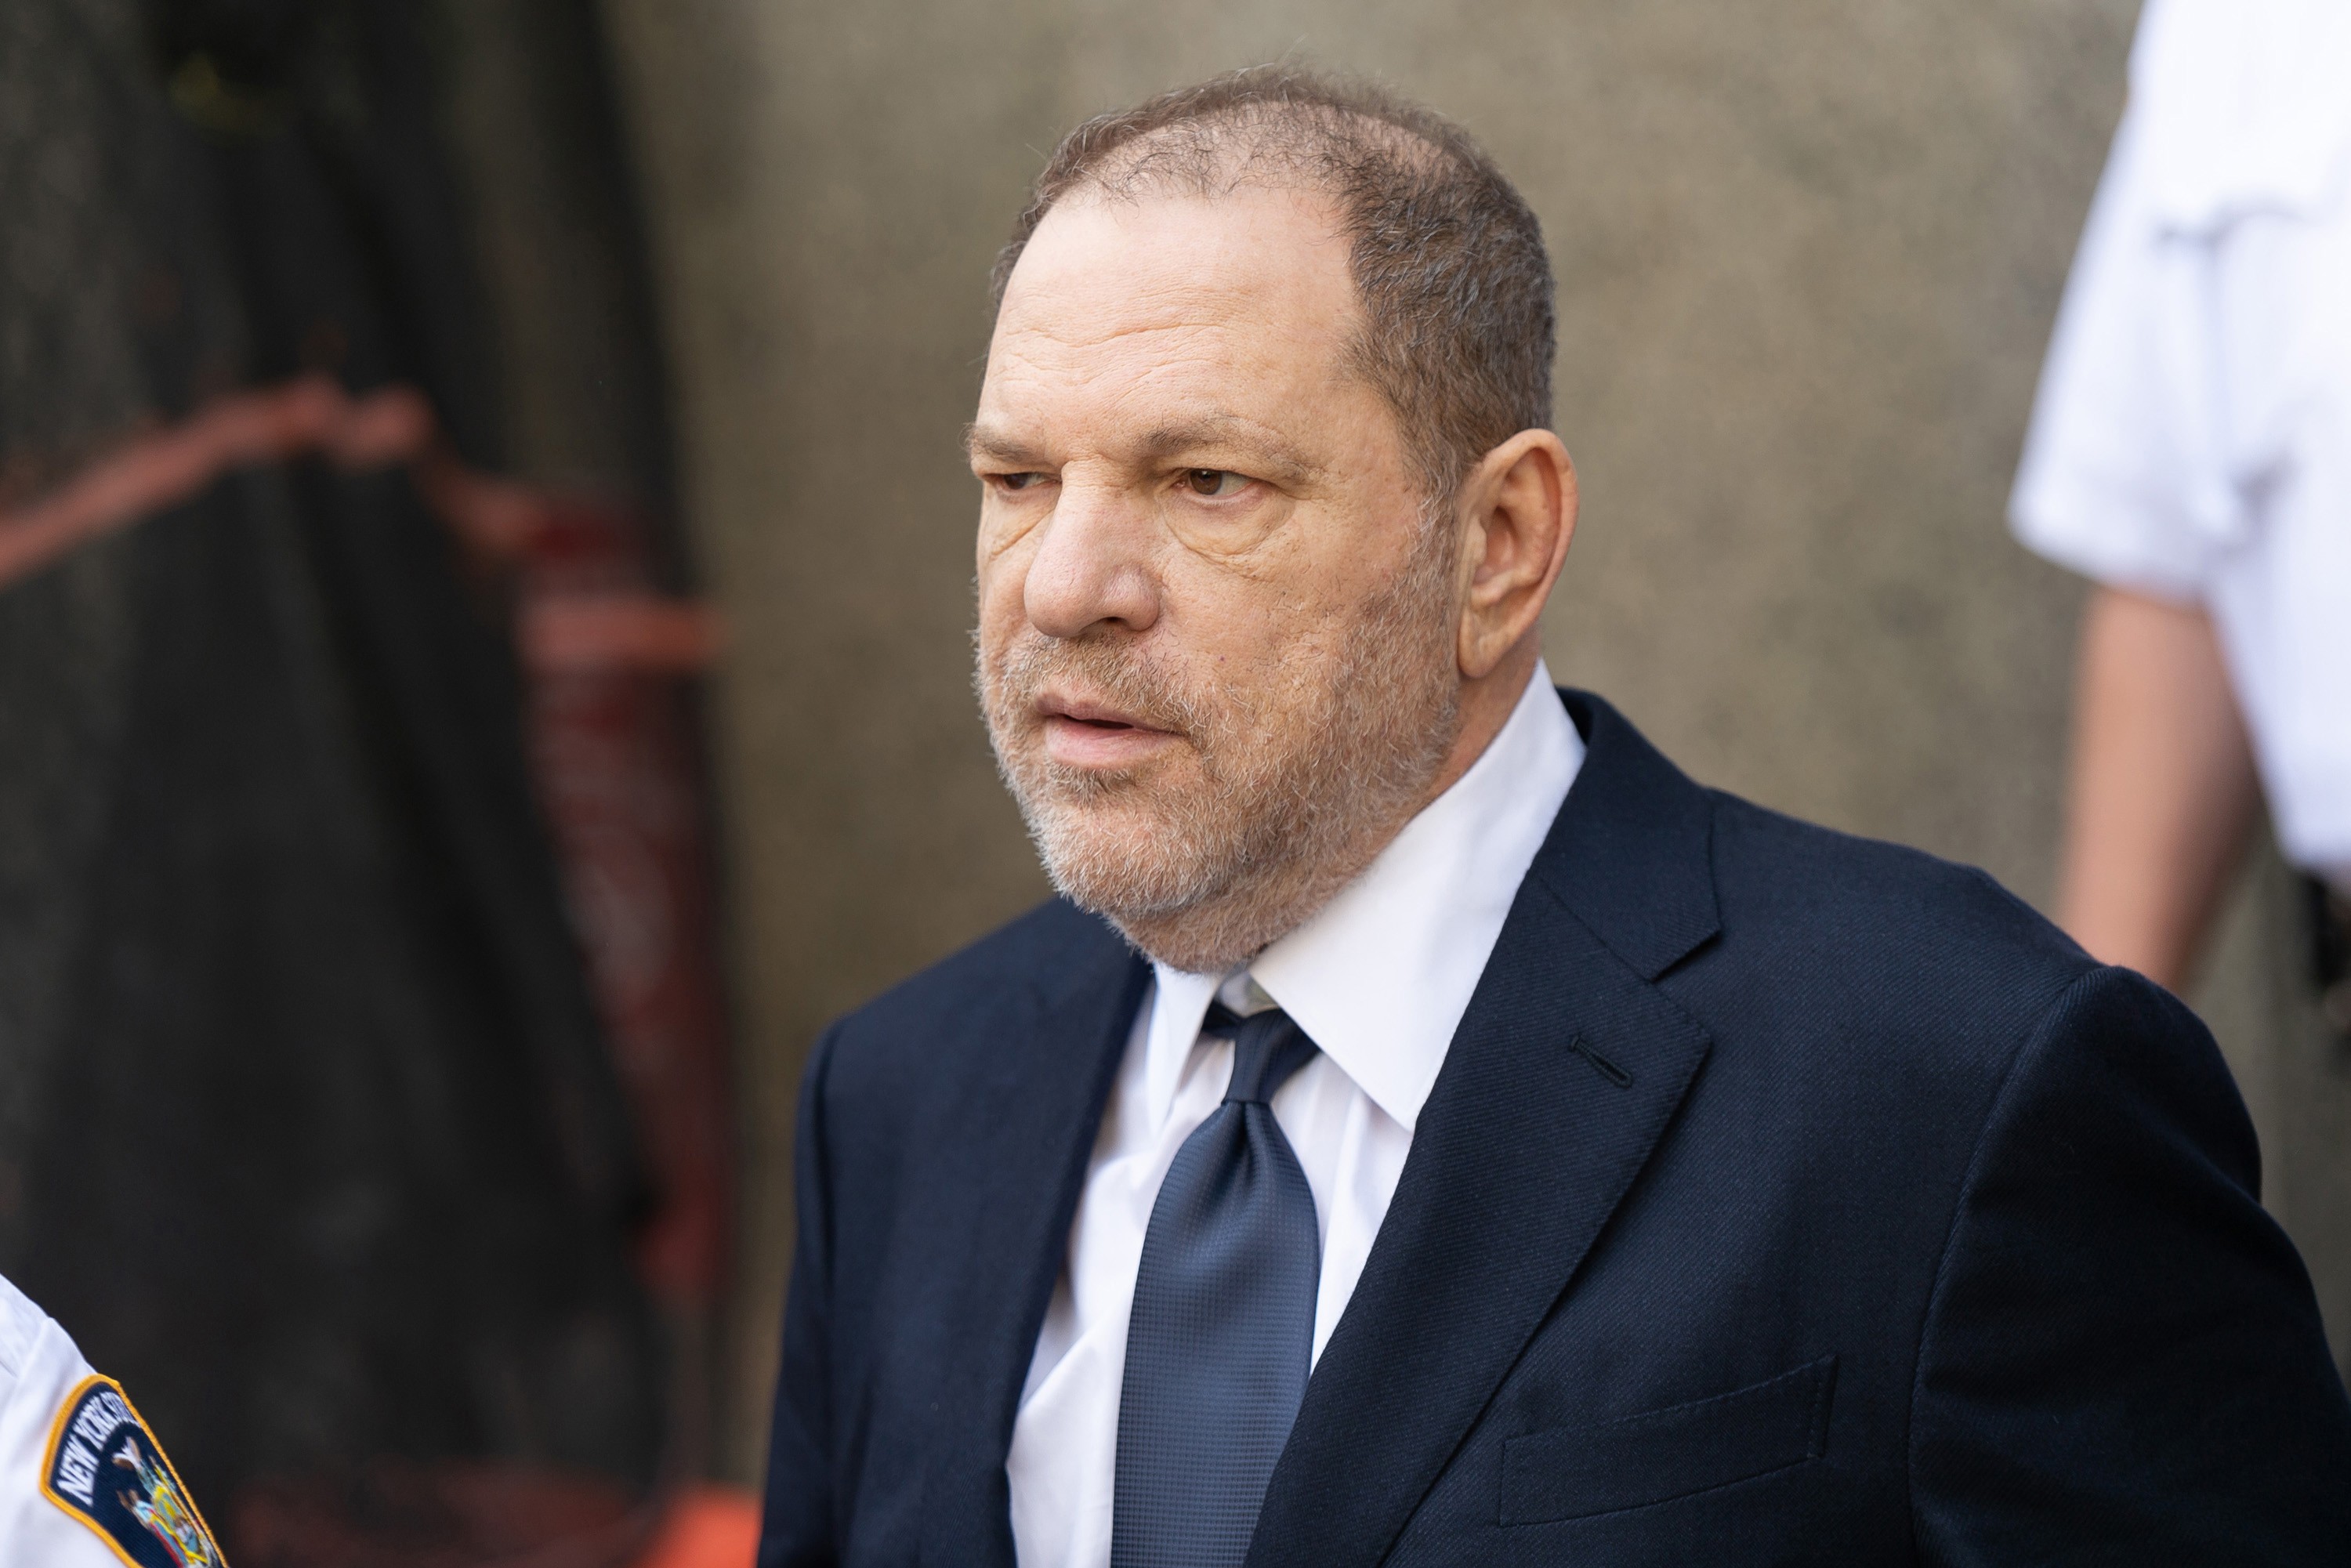 Harvey Weinstein leaving New York Criminal Court following his arraignment in New York on June 5, 2018. Photo: TNS